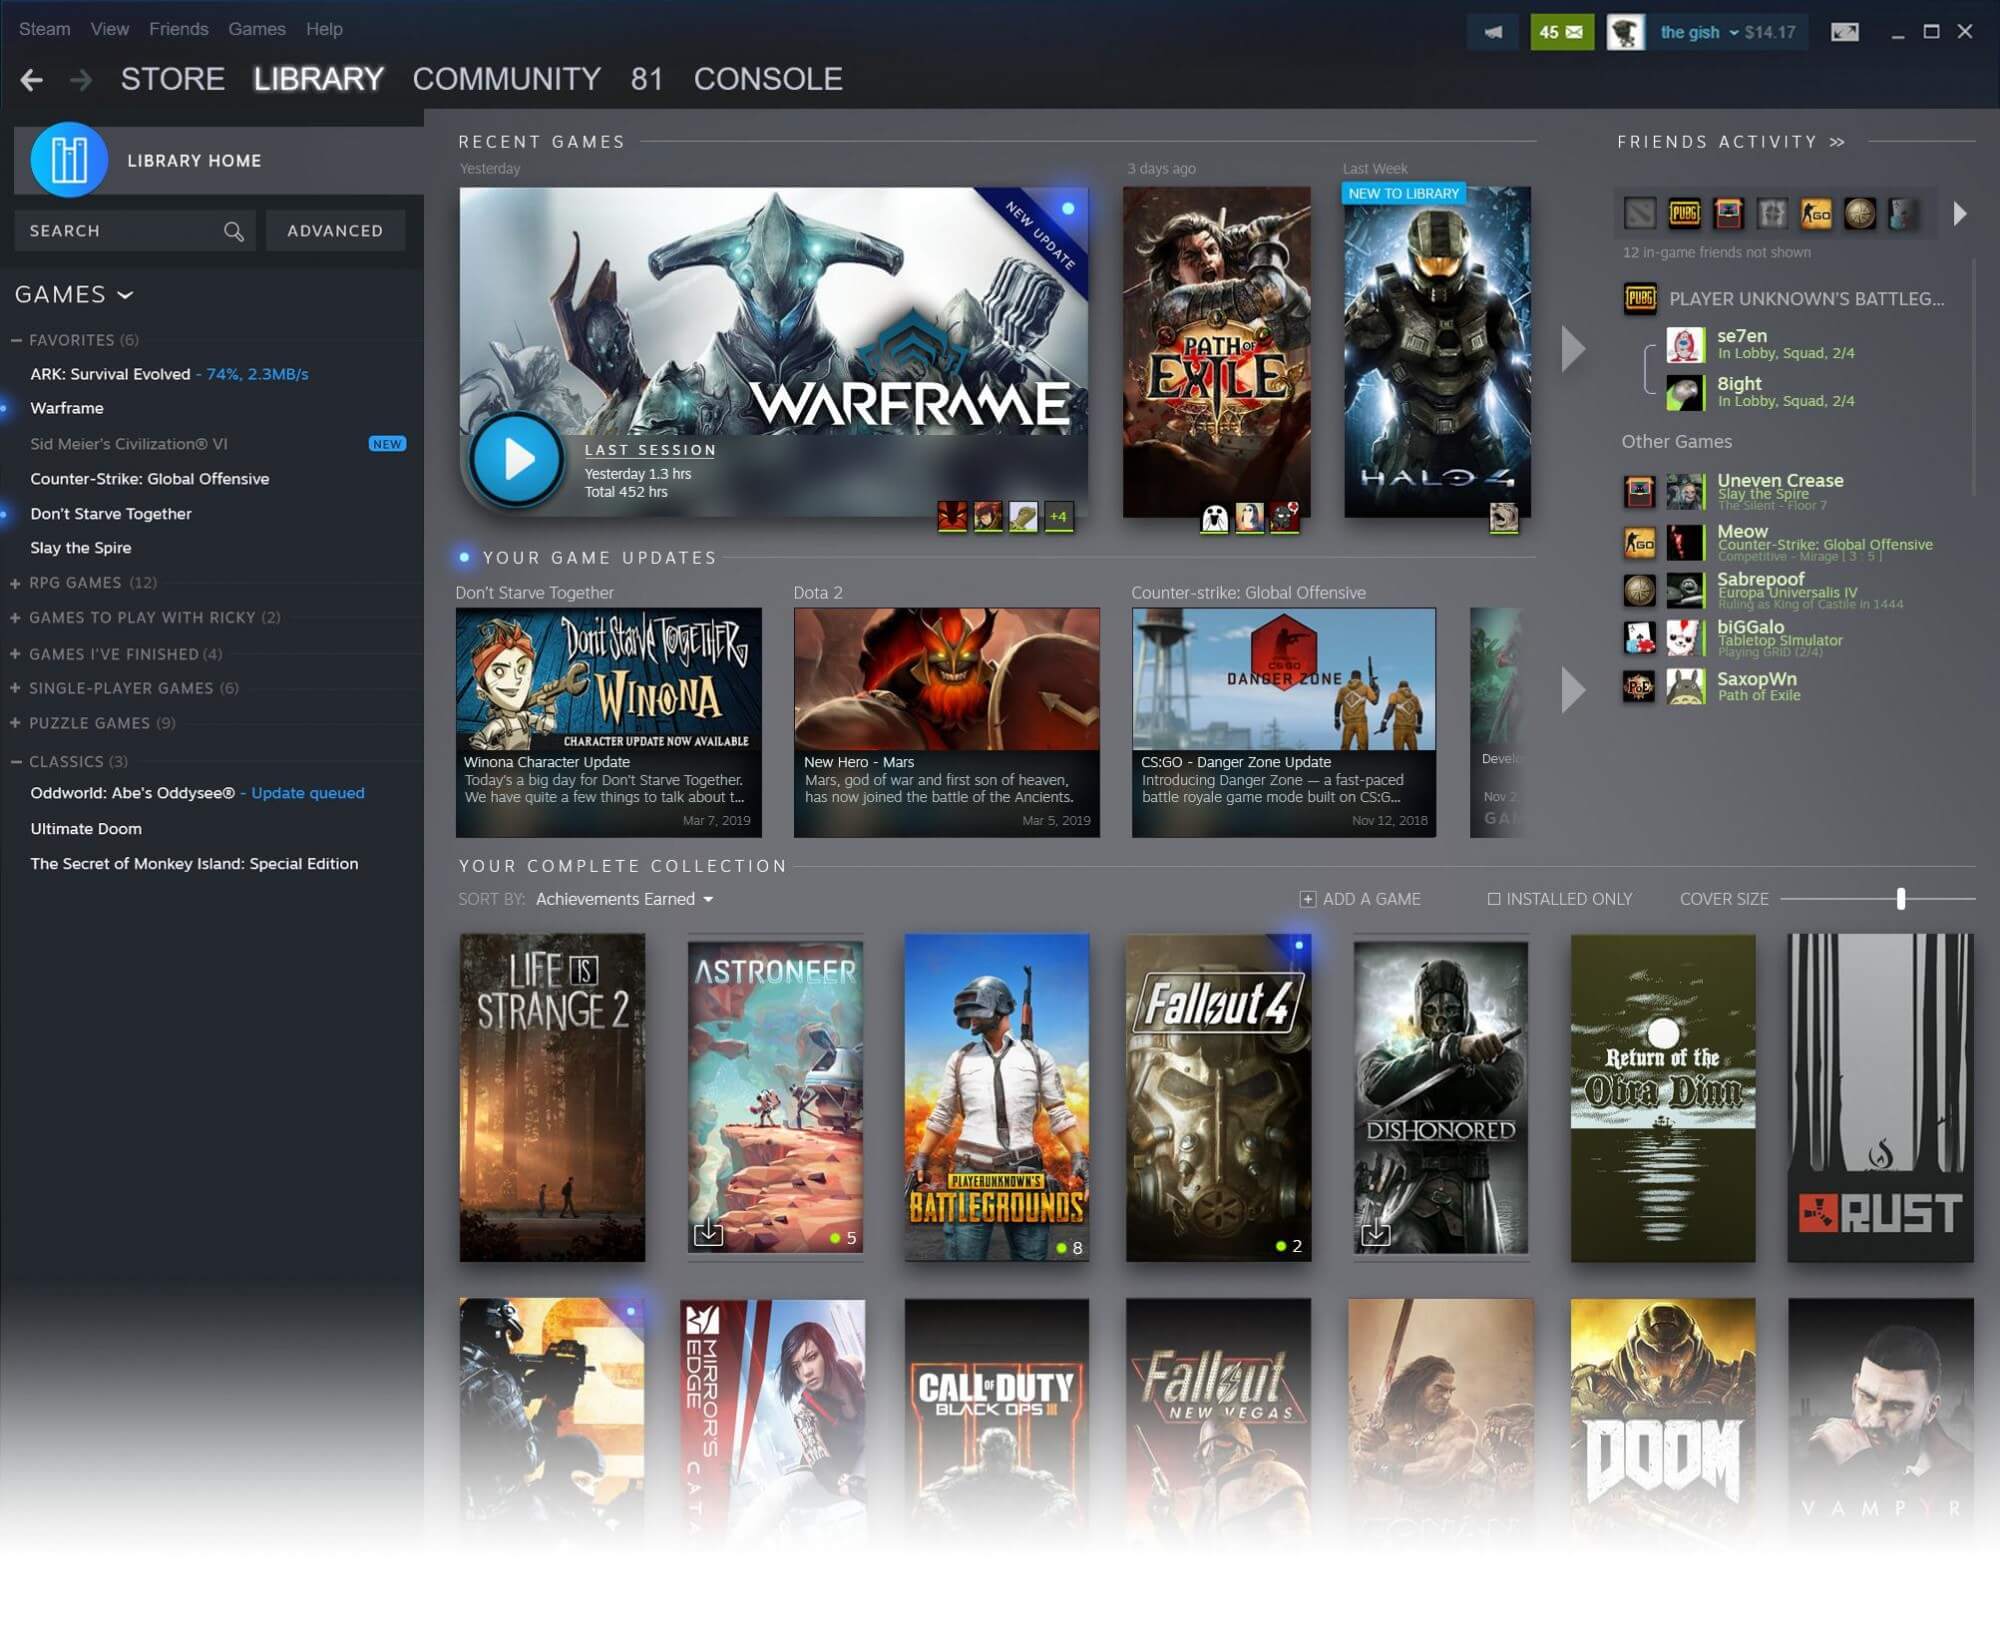 Valve is revamping your Steam Library, introducing Events feature